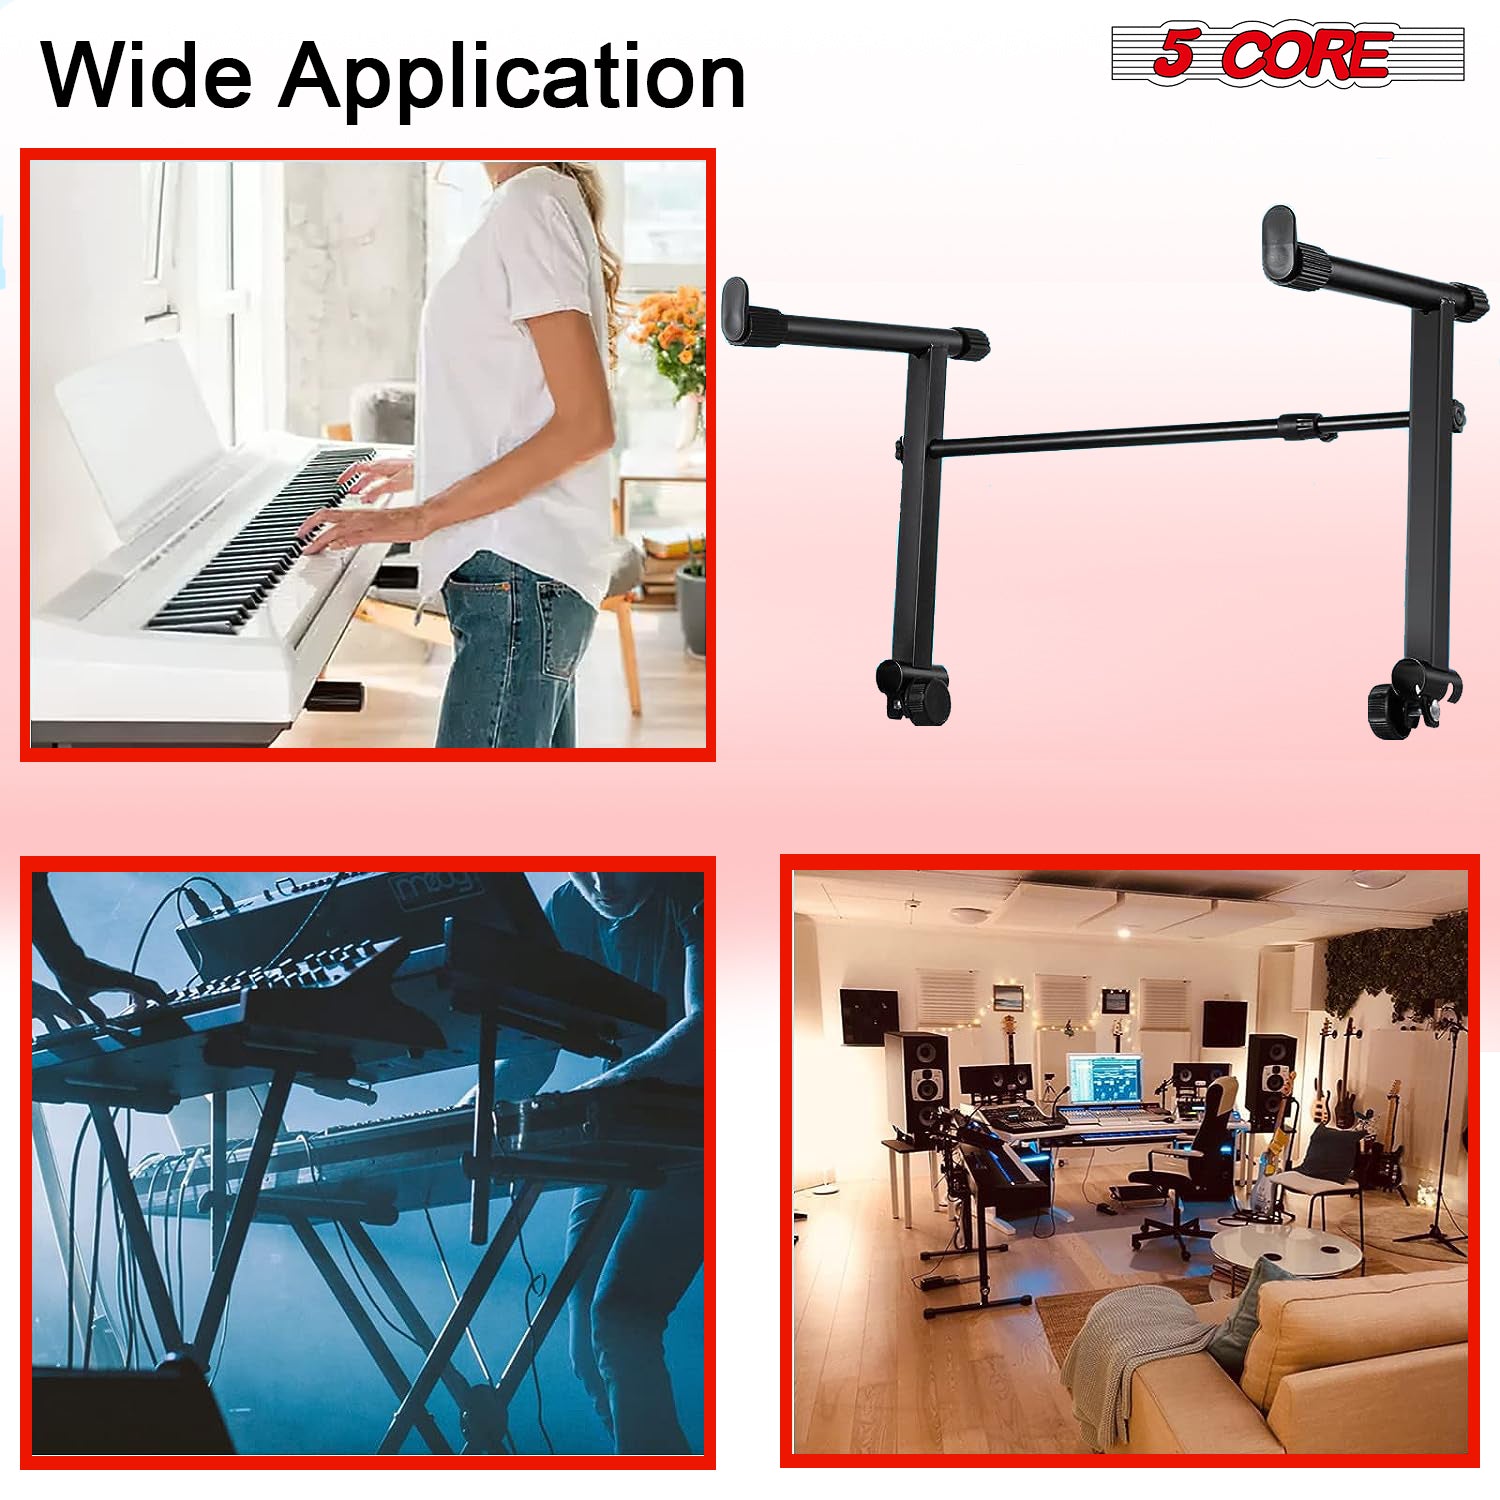 5 Core Second Tier Keyboard Stand Riser • Universal 2 Tier X Style Keyboard Holder • w Nonslip Arms